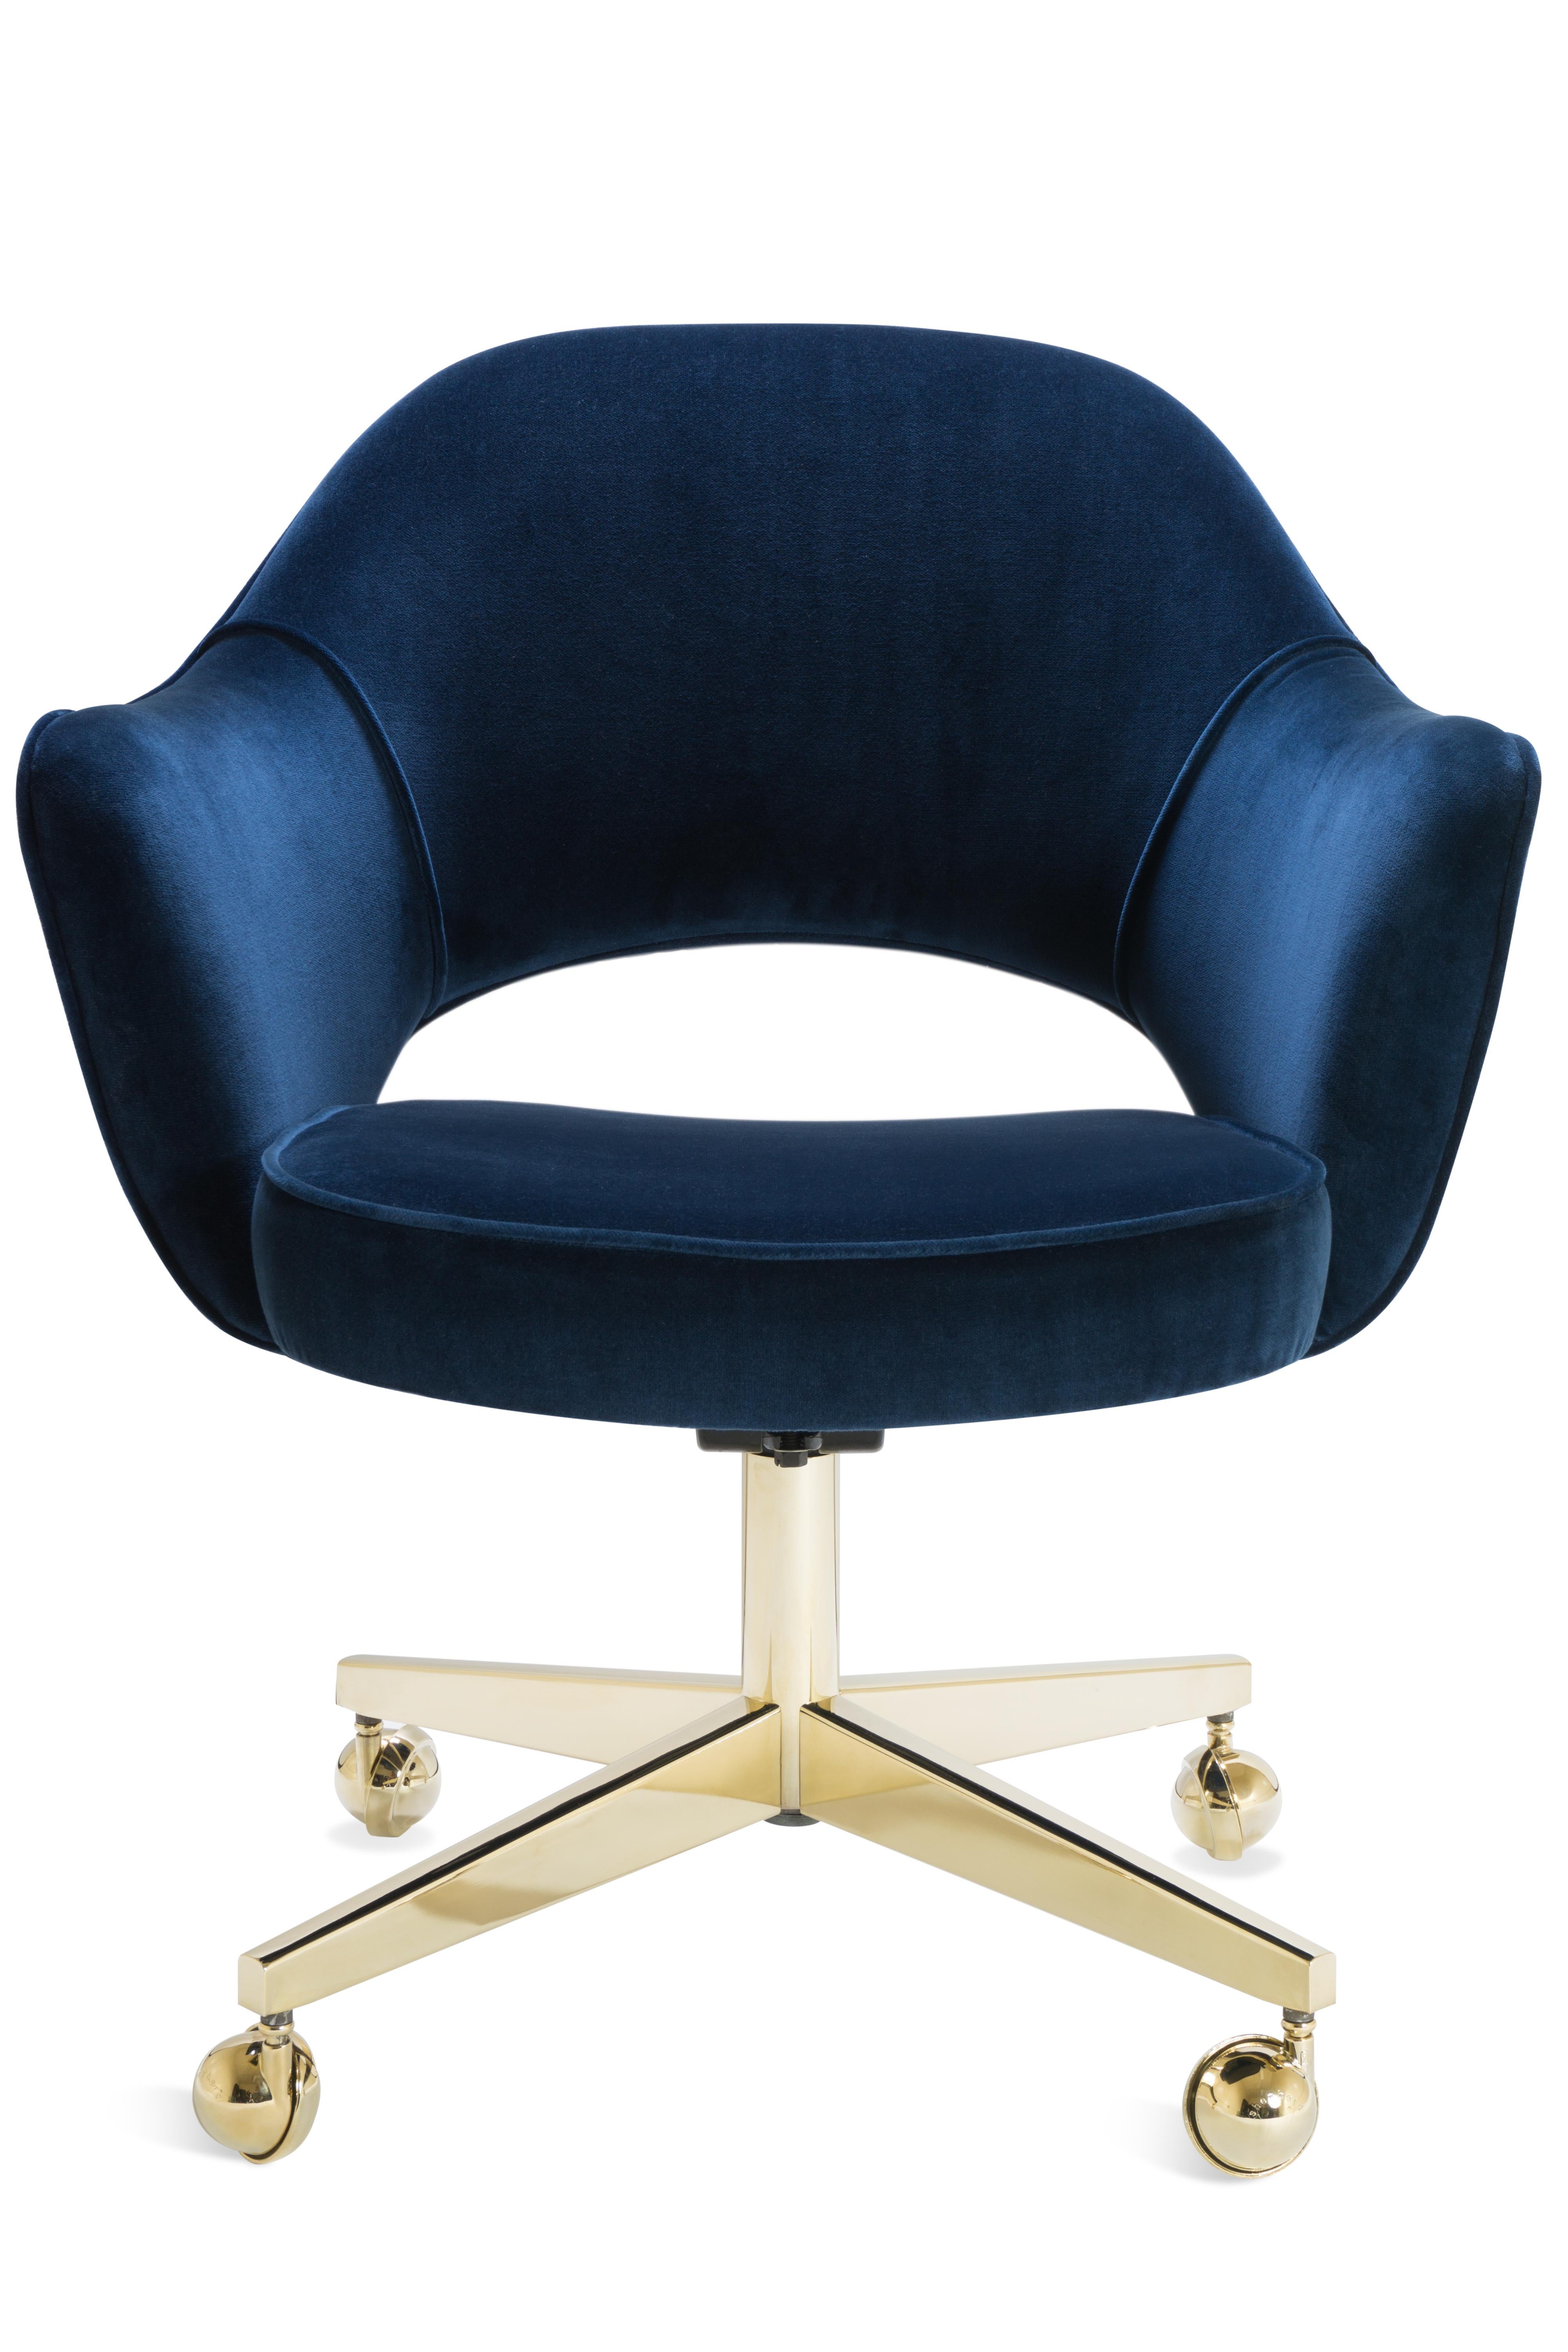 Masterful restoration of 100% authentic Saarinen executive arm chair executed in line with original specifications. In addition to new fabric in stunning navy Italian velvet, the foam in the chair is replaced as well. This chair features a vintage